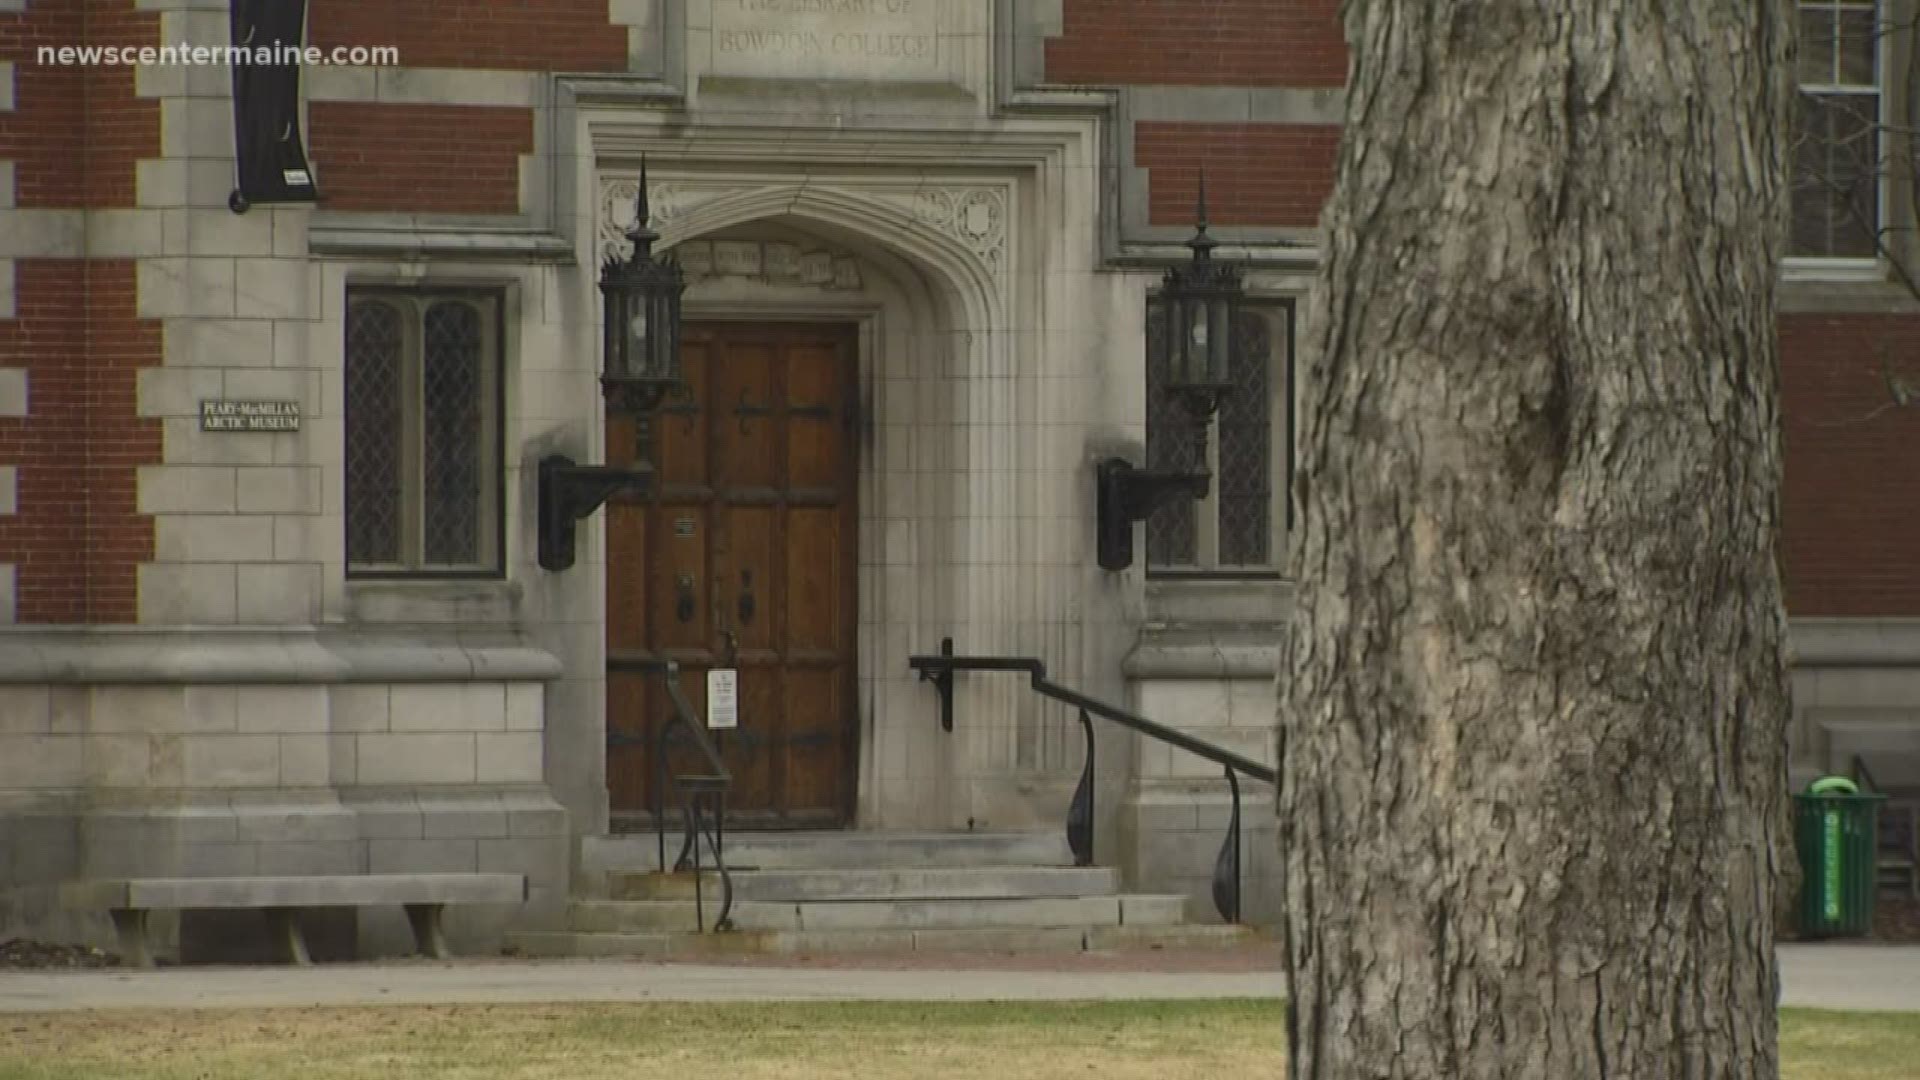 Bowdoin college says it is sanitizing certain areas of campus due to concerns of the coronavirus.